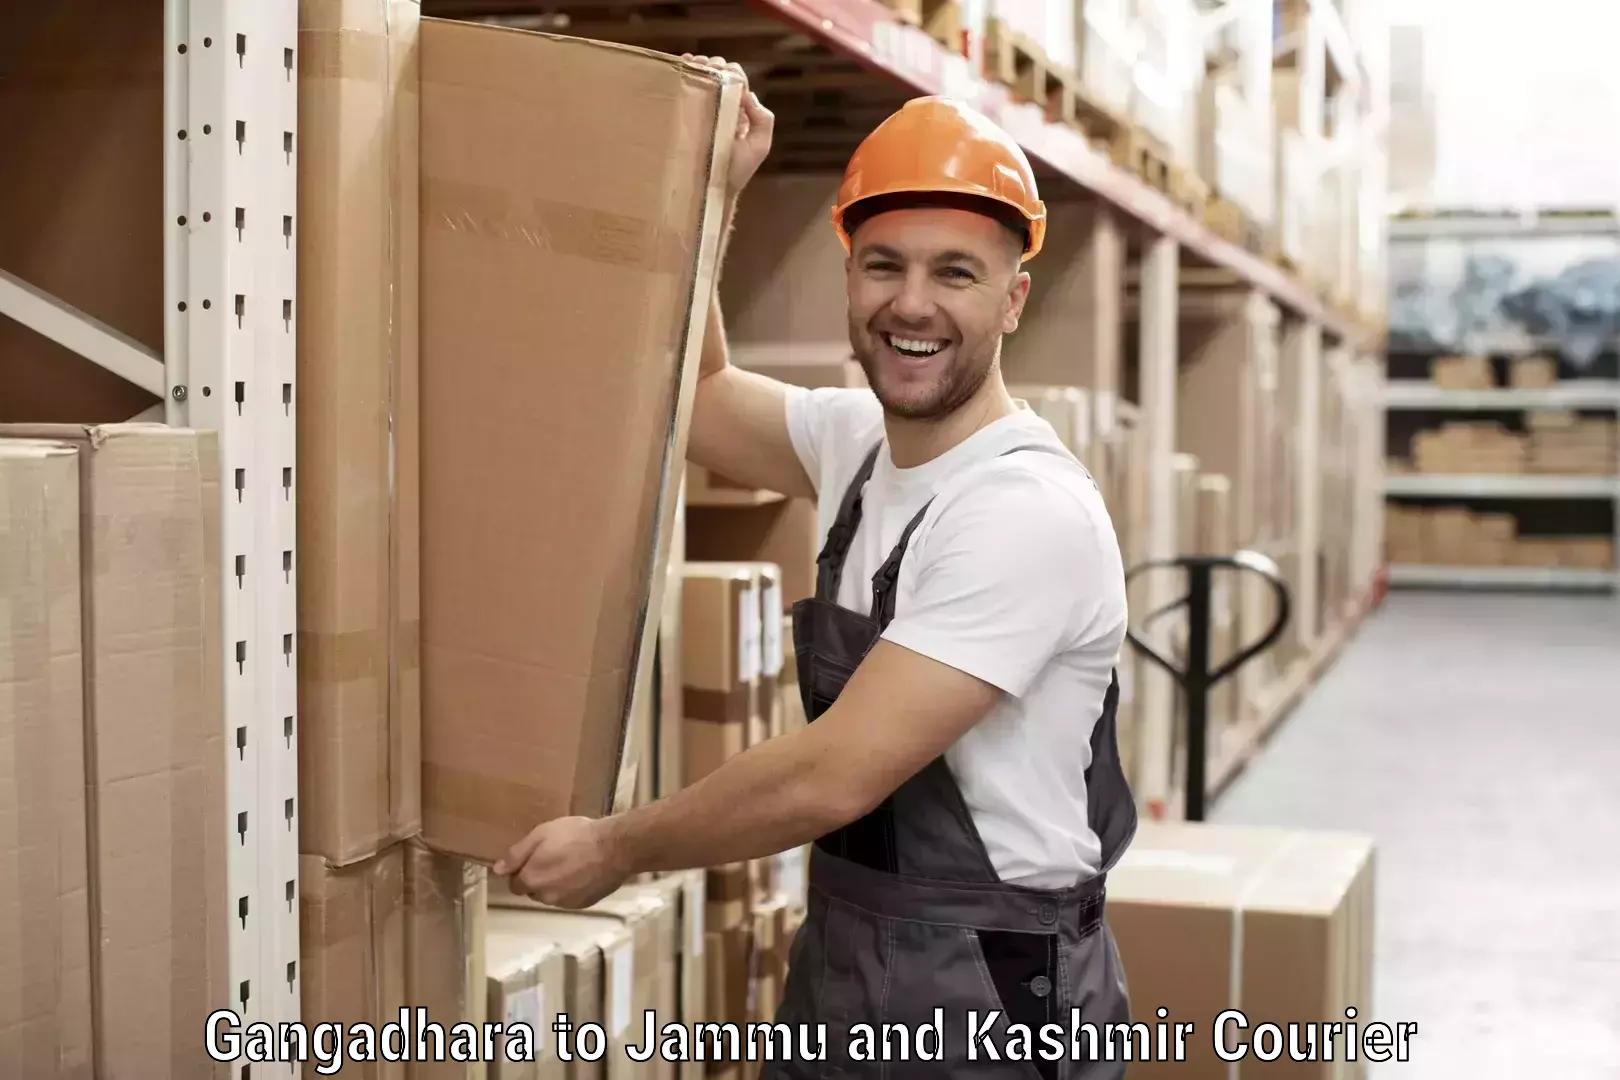 Reliable courier services Gangadhara to Jammu and Kashmir